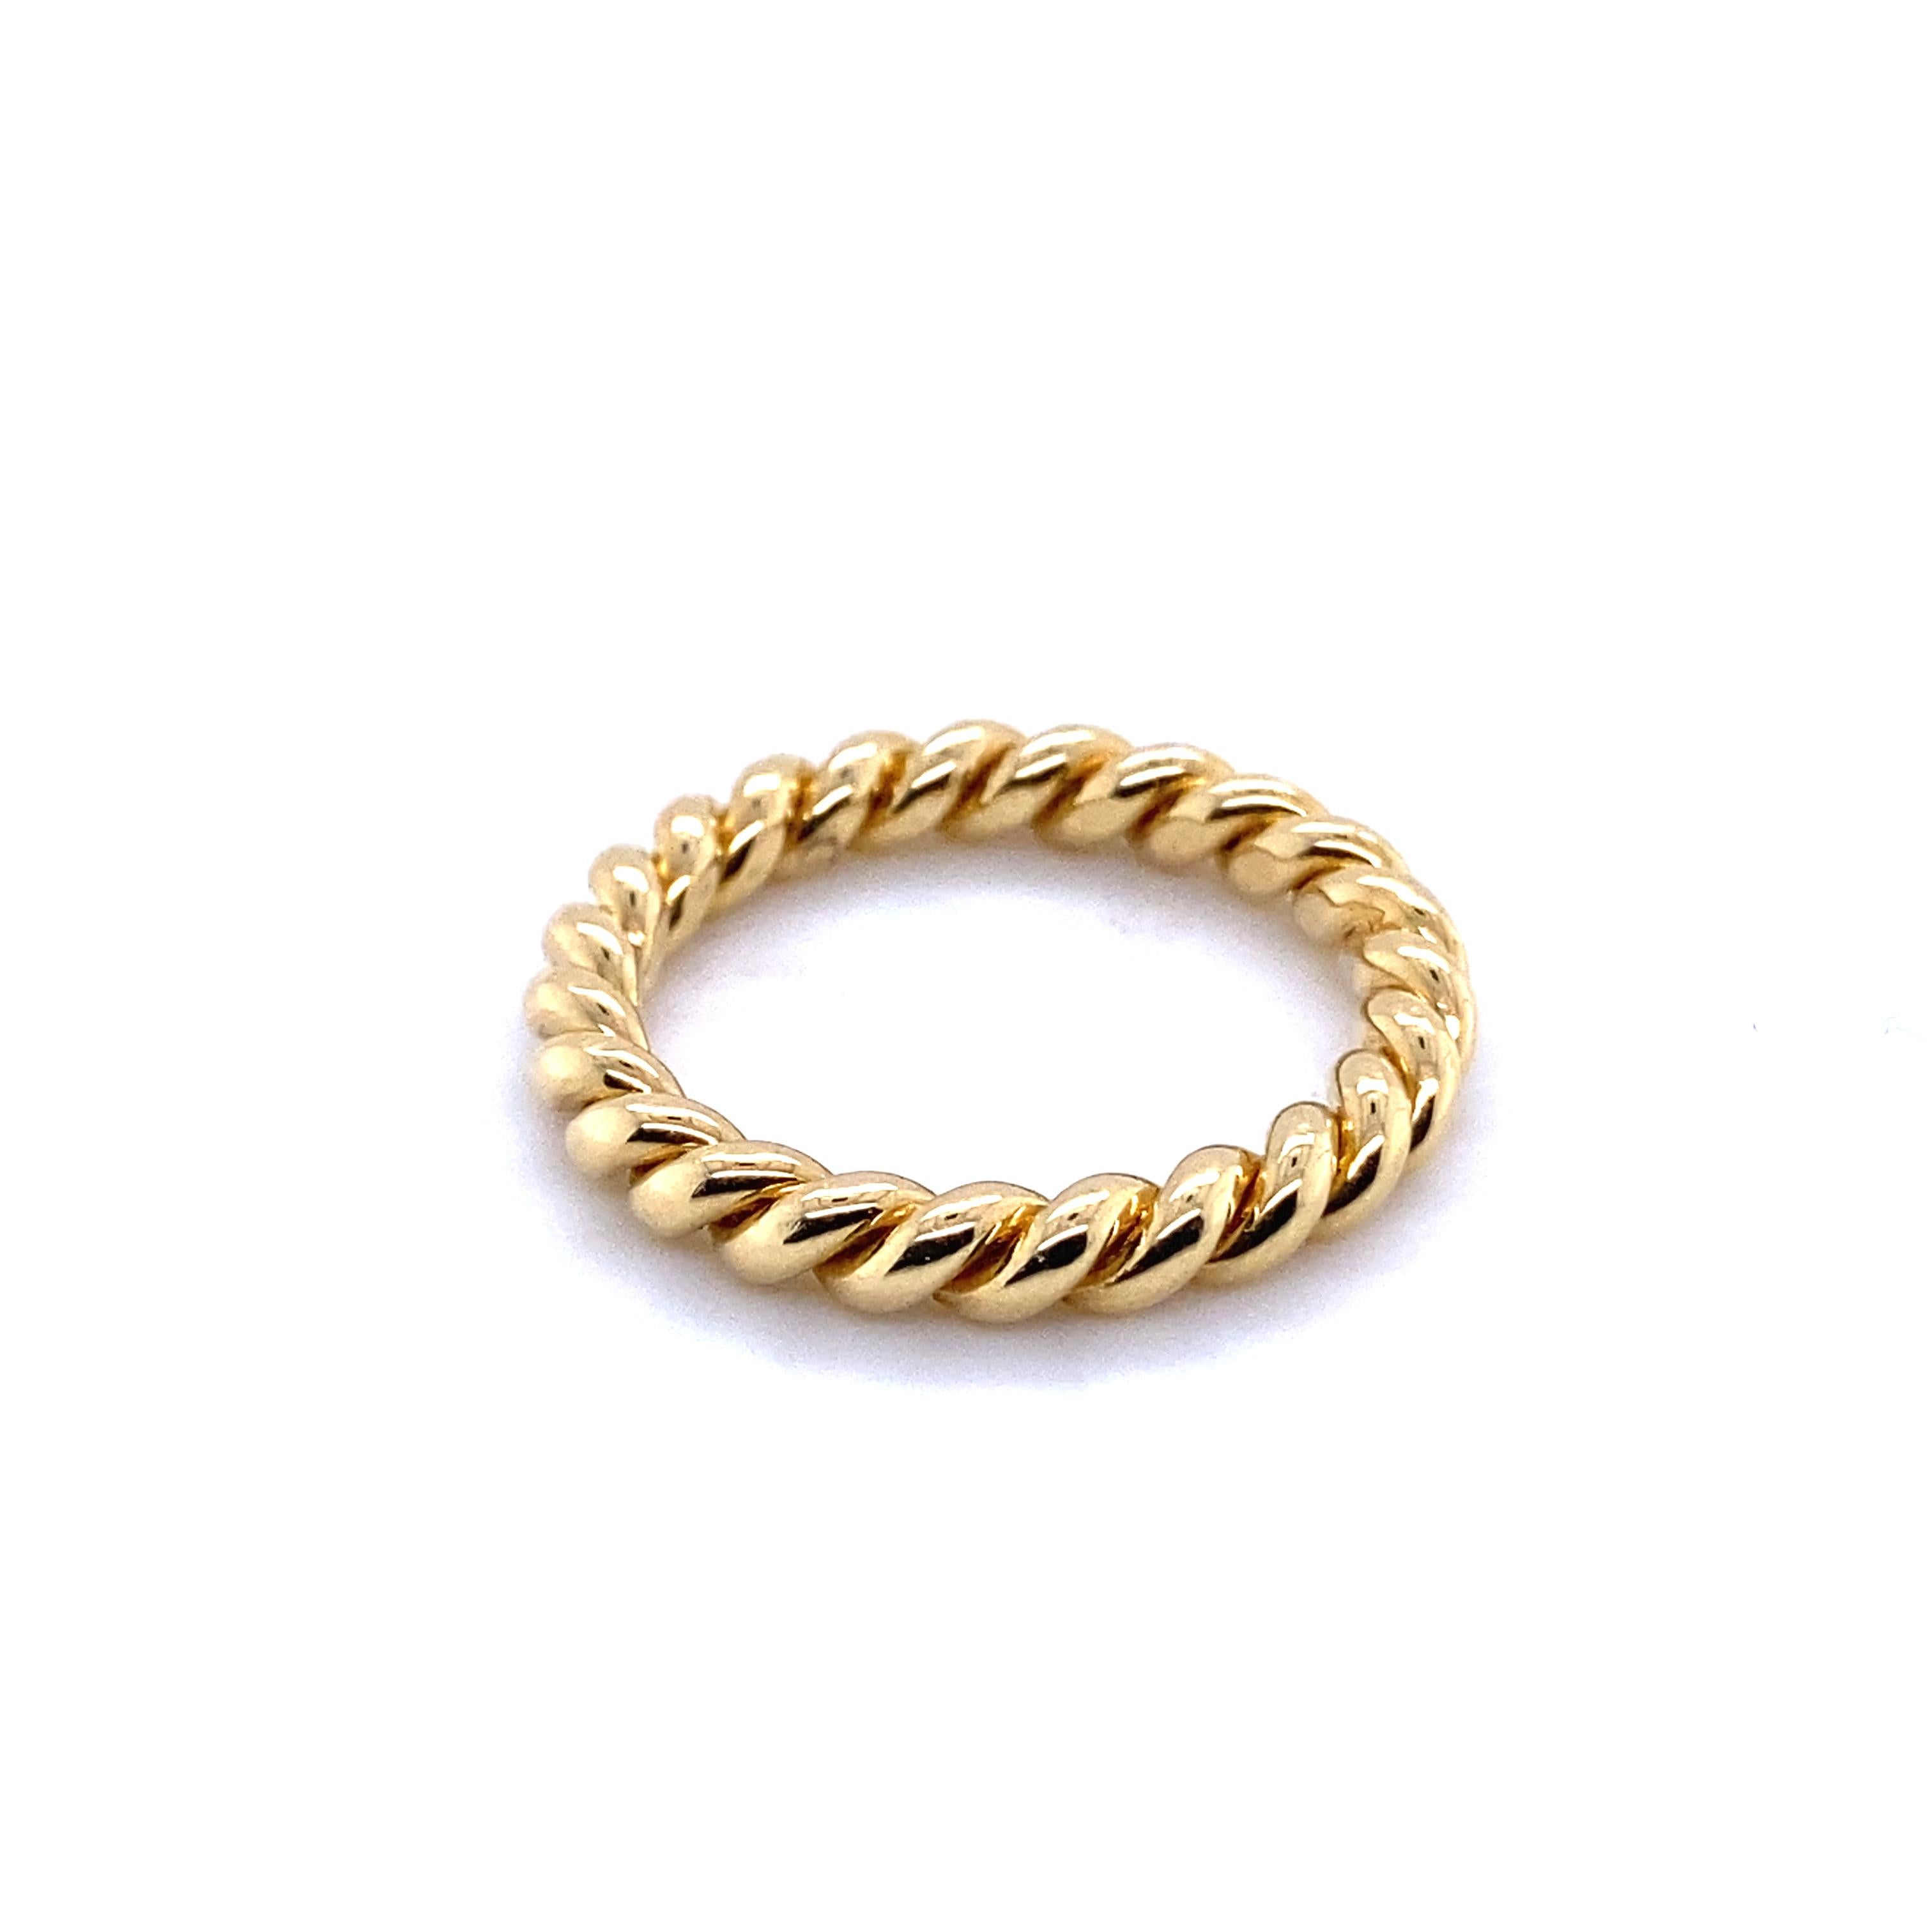 Discover the sumptuous braided yellow gold ring from the Collection Française by Mesure et Art du Temps. Carefully crafted, this 18-carat yellow gold ring is the perfect embodiment of timeless elegance and French craftsmanship.

Delicately